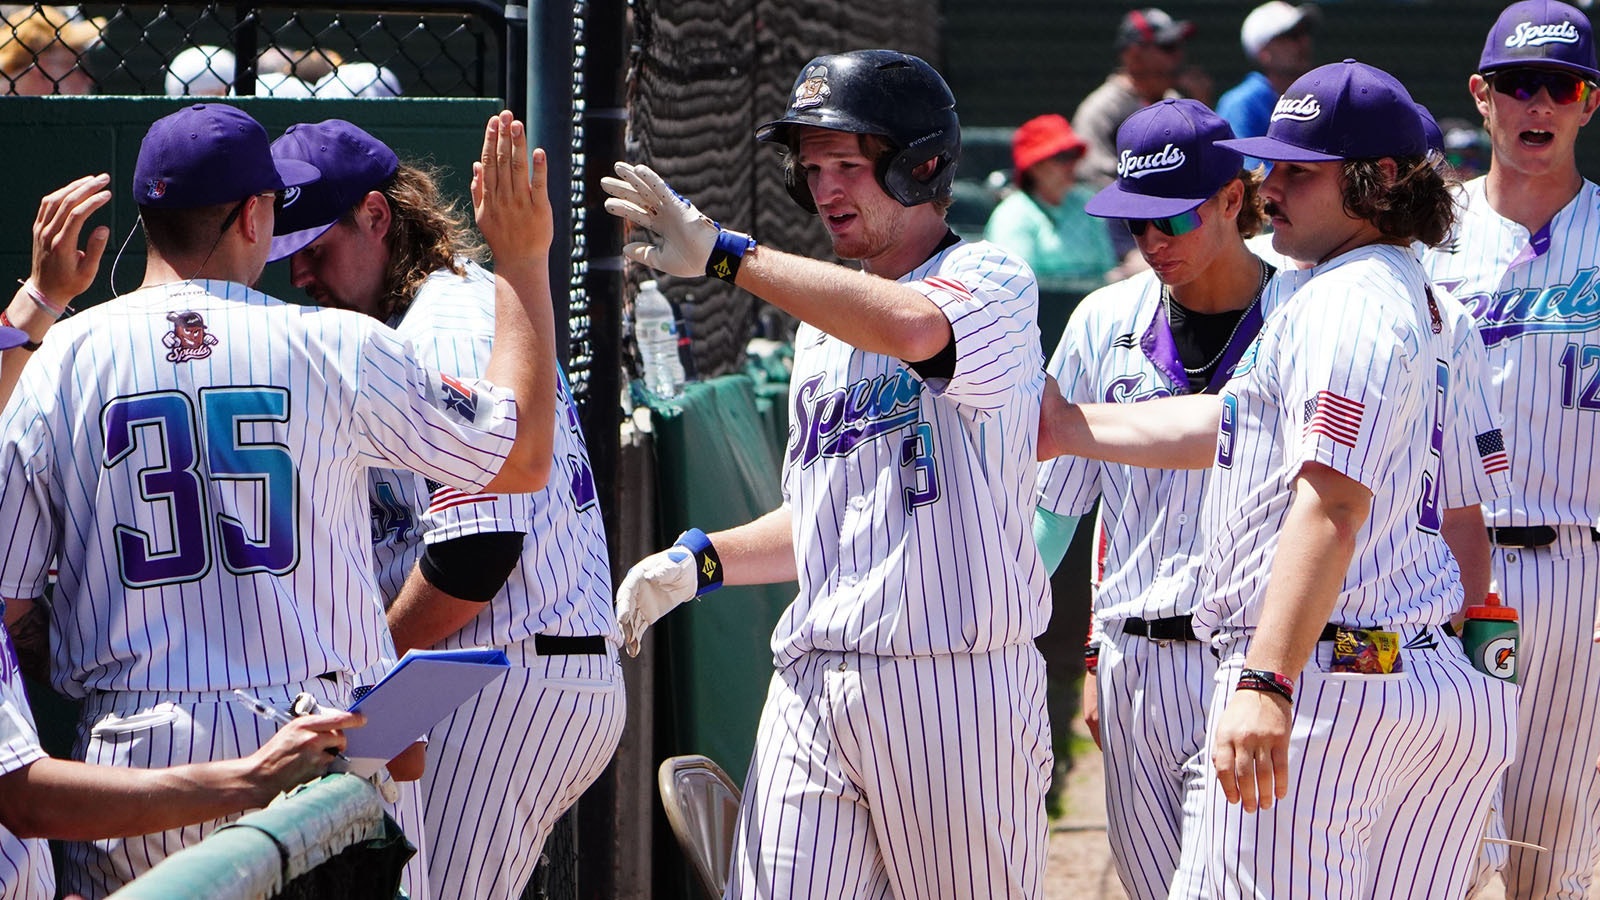 The Casper Spuds celebrate with a teammate after crossing the home plate.